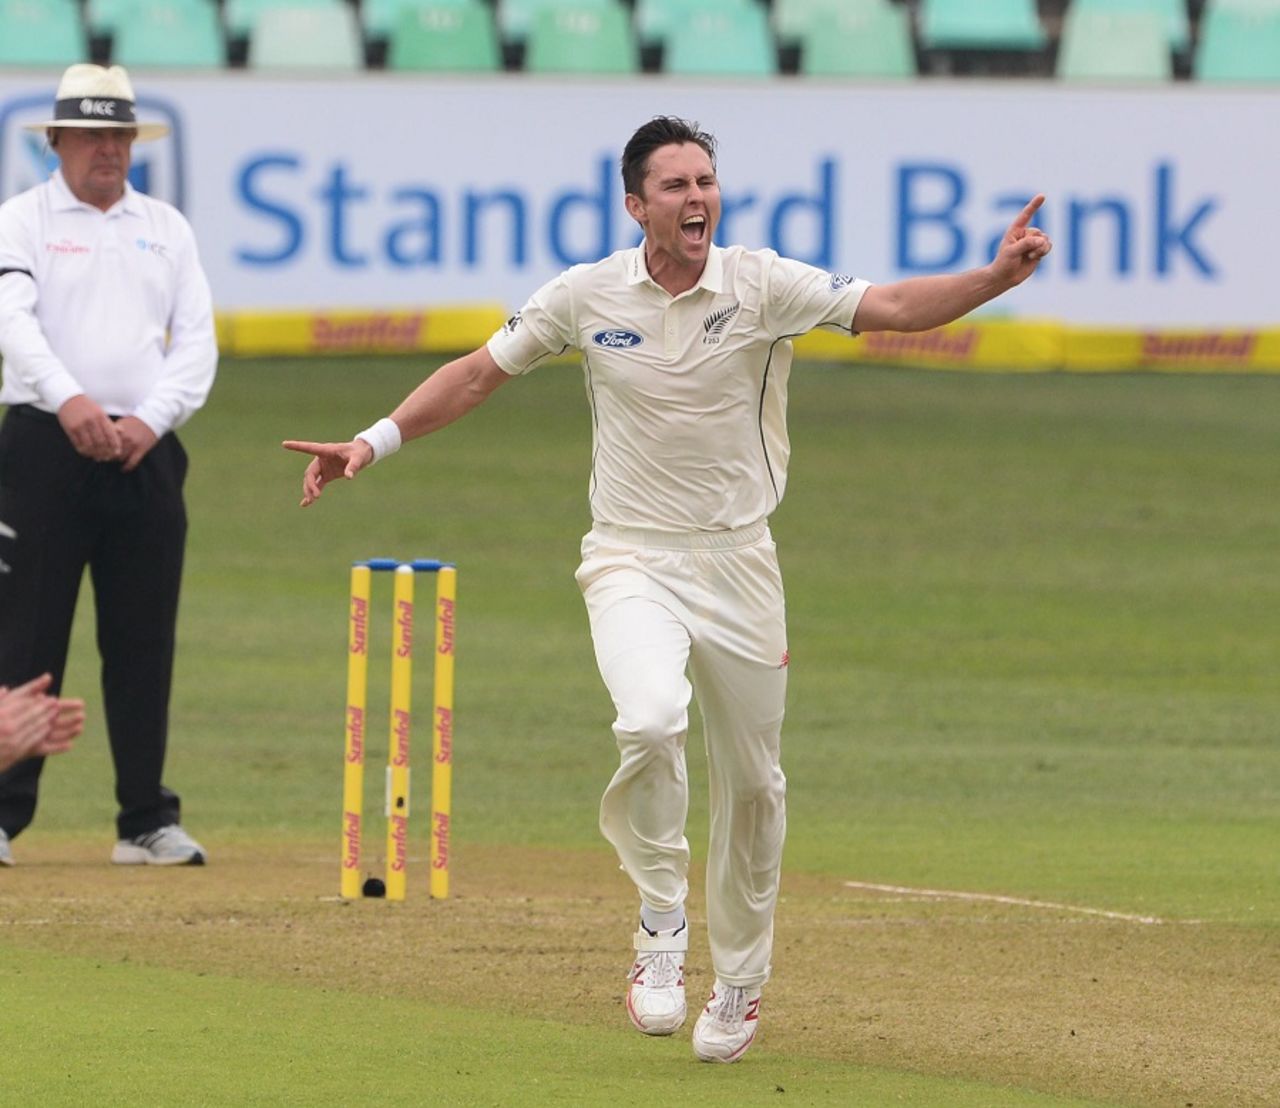 Trent Boult is ecstatic after picking up a wicket, South Africa v New Zealand, 1st Test, Durban, 1st day, August 19, 2016